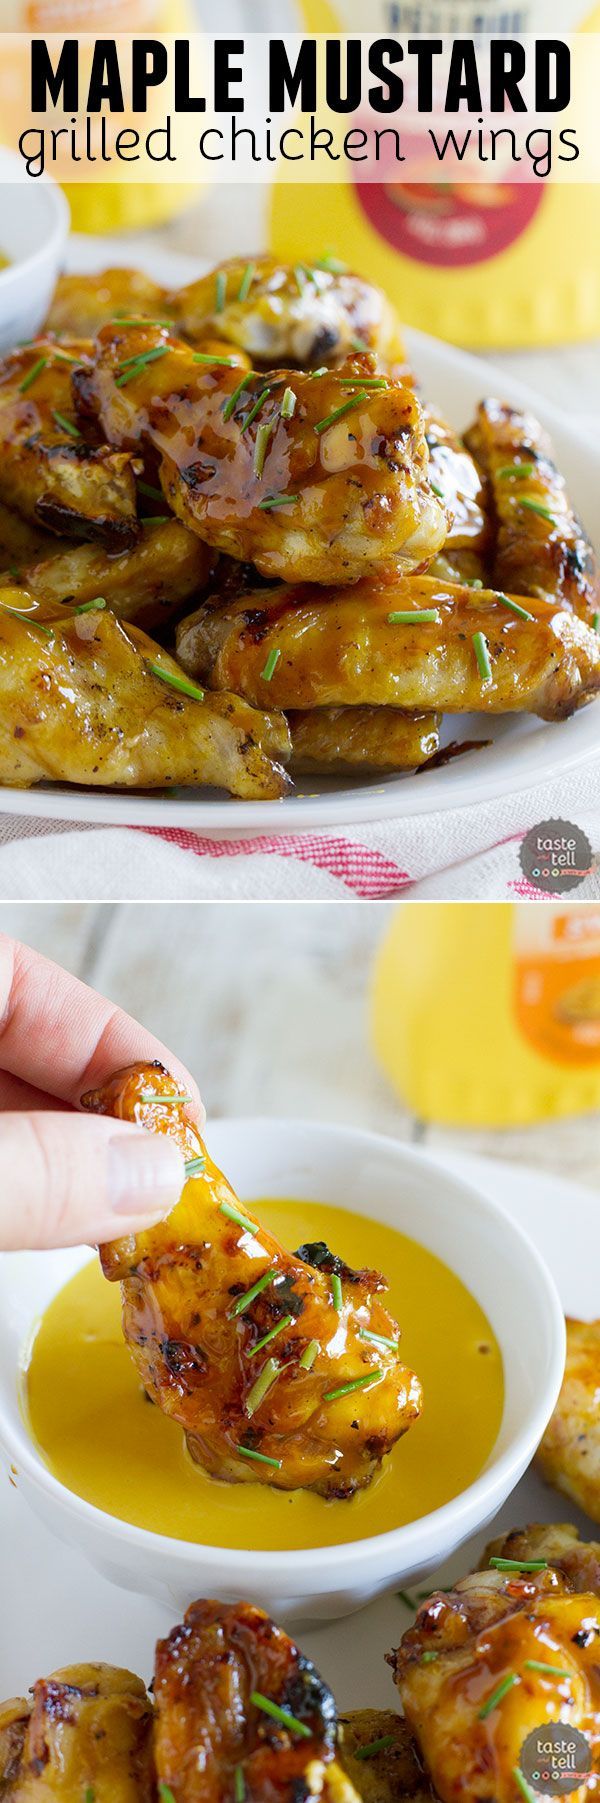 Maple Mustard Grilled Chicken Wings